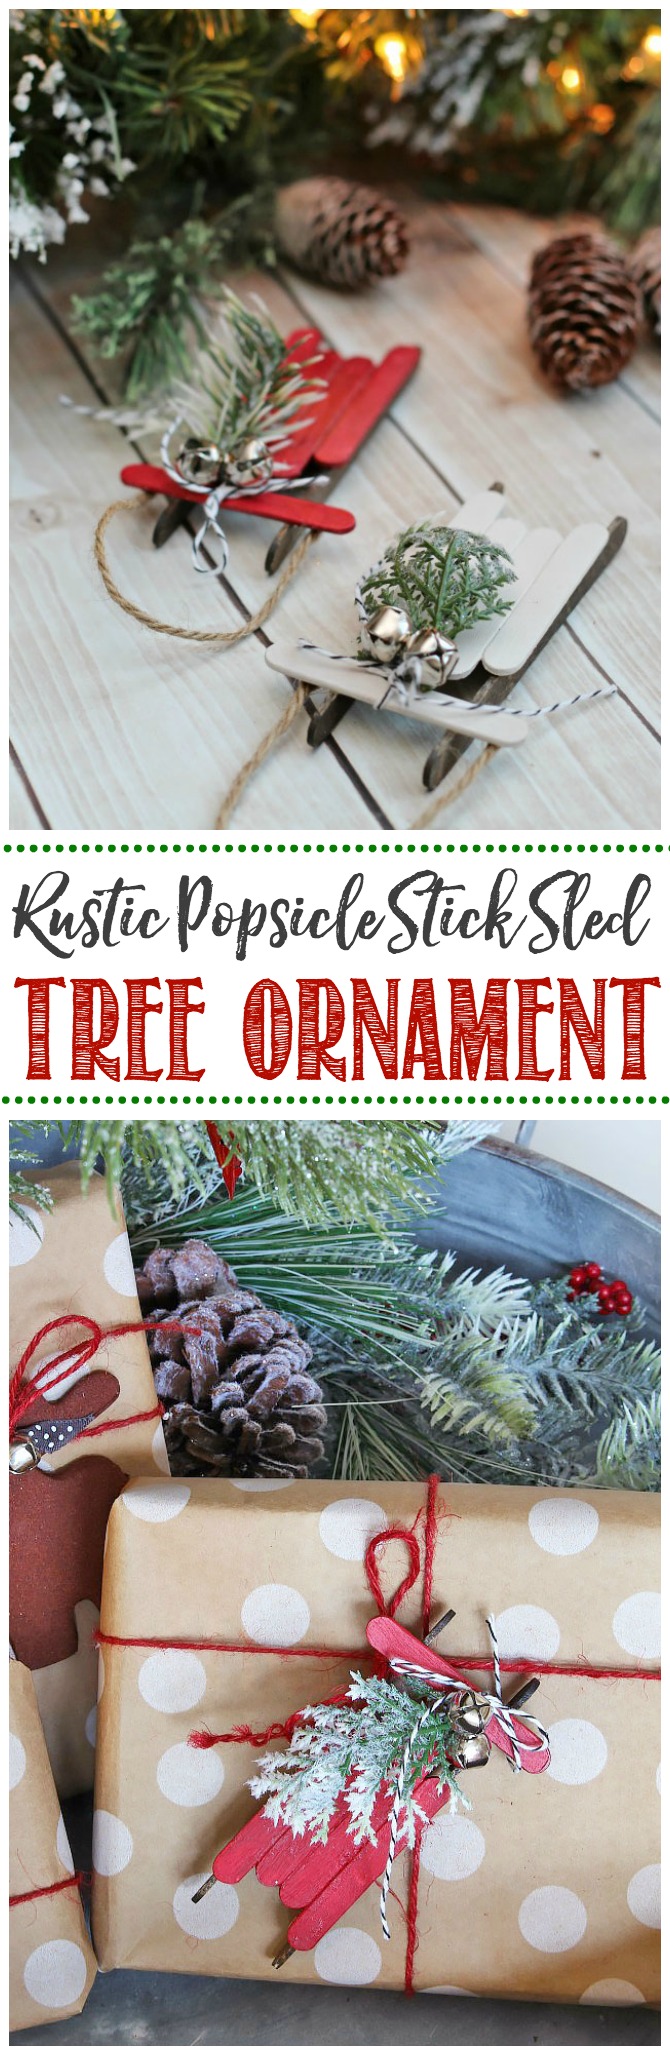 These rustic popsicle stick sleds are so pretty. They're an easy DIY Christmas tree ornament that and are so much fun to make!